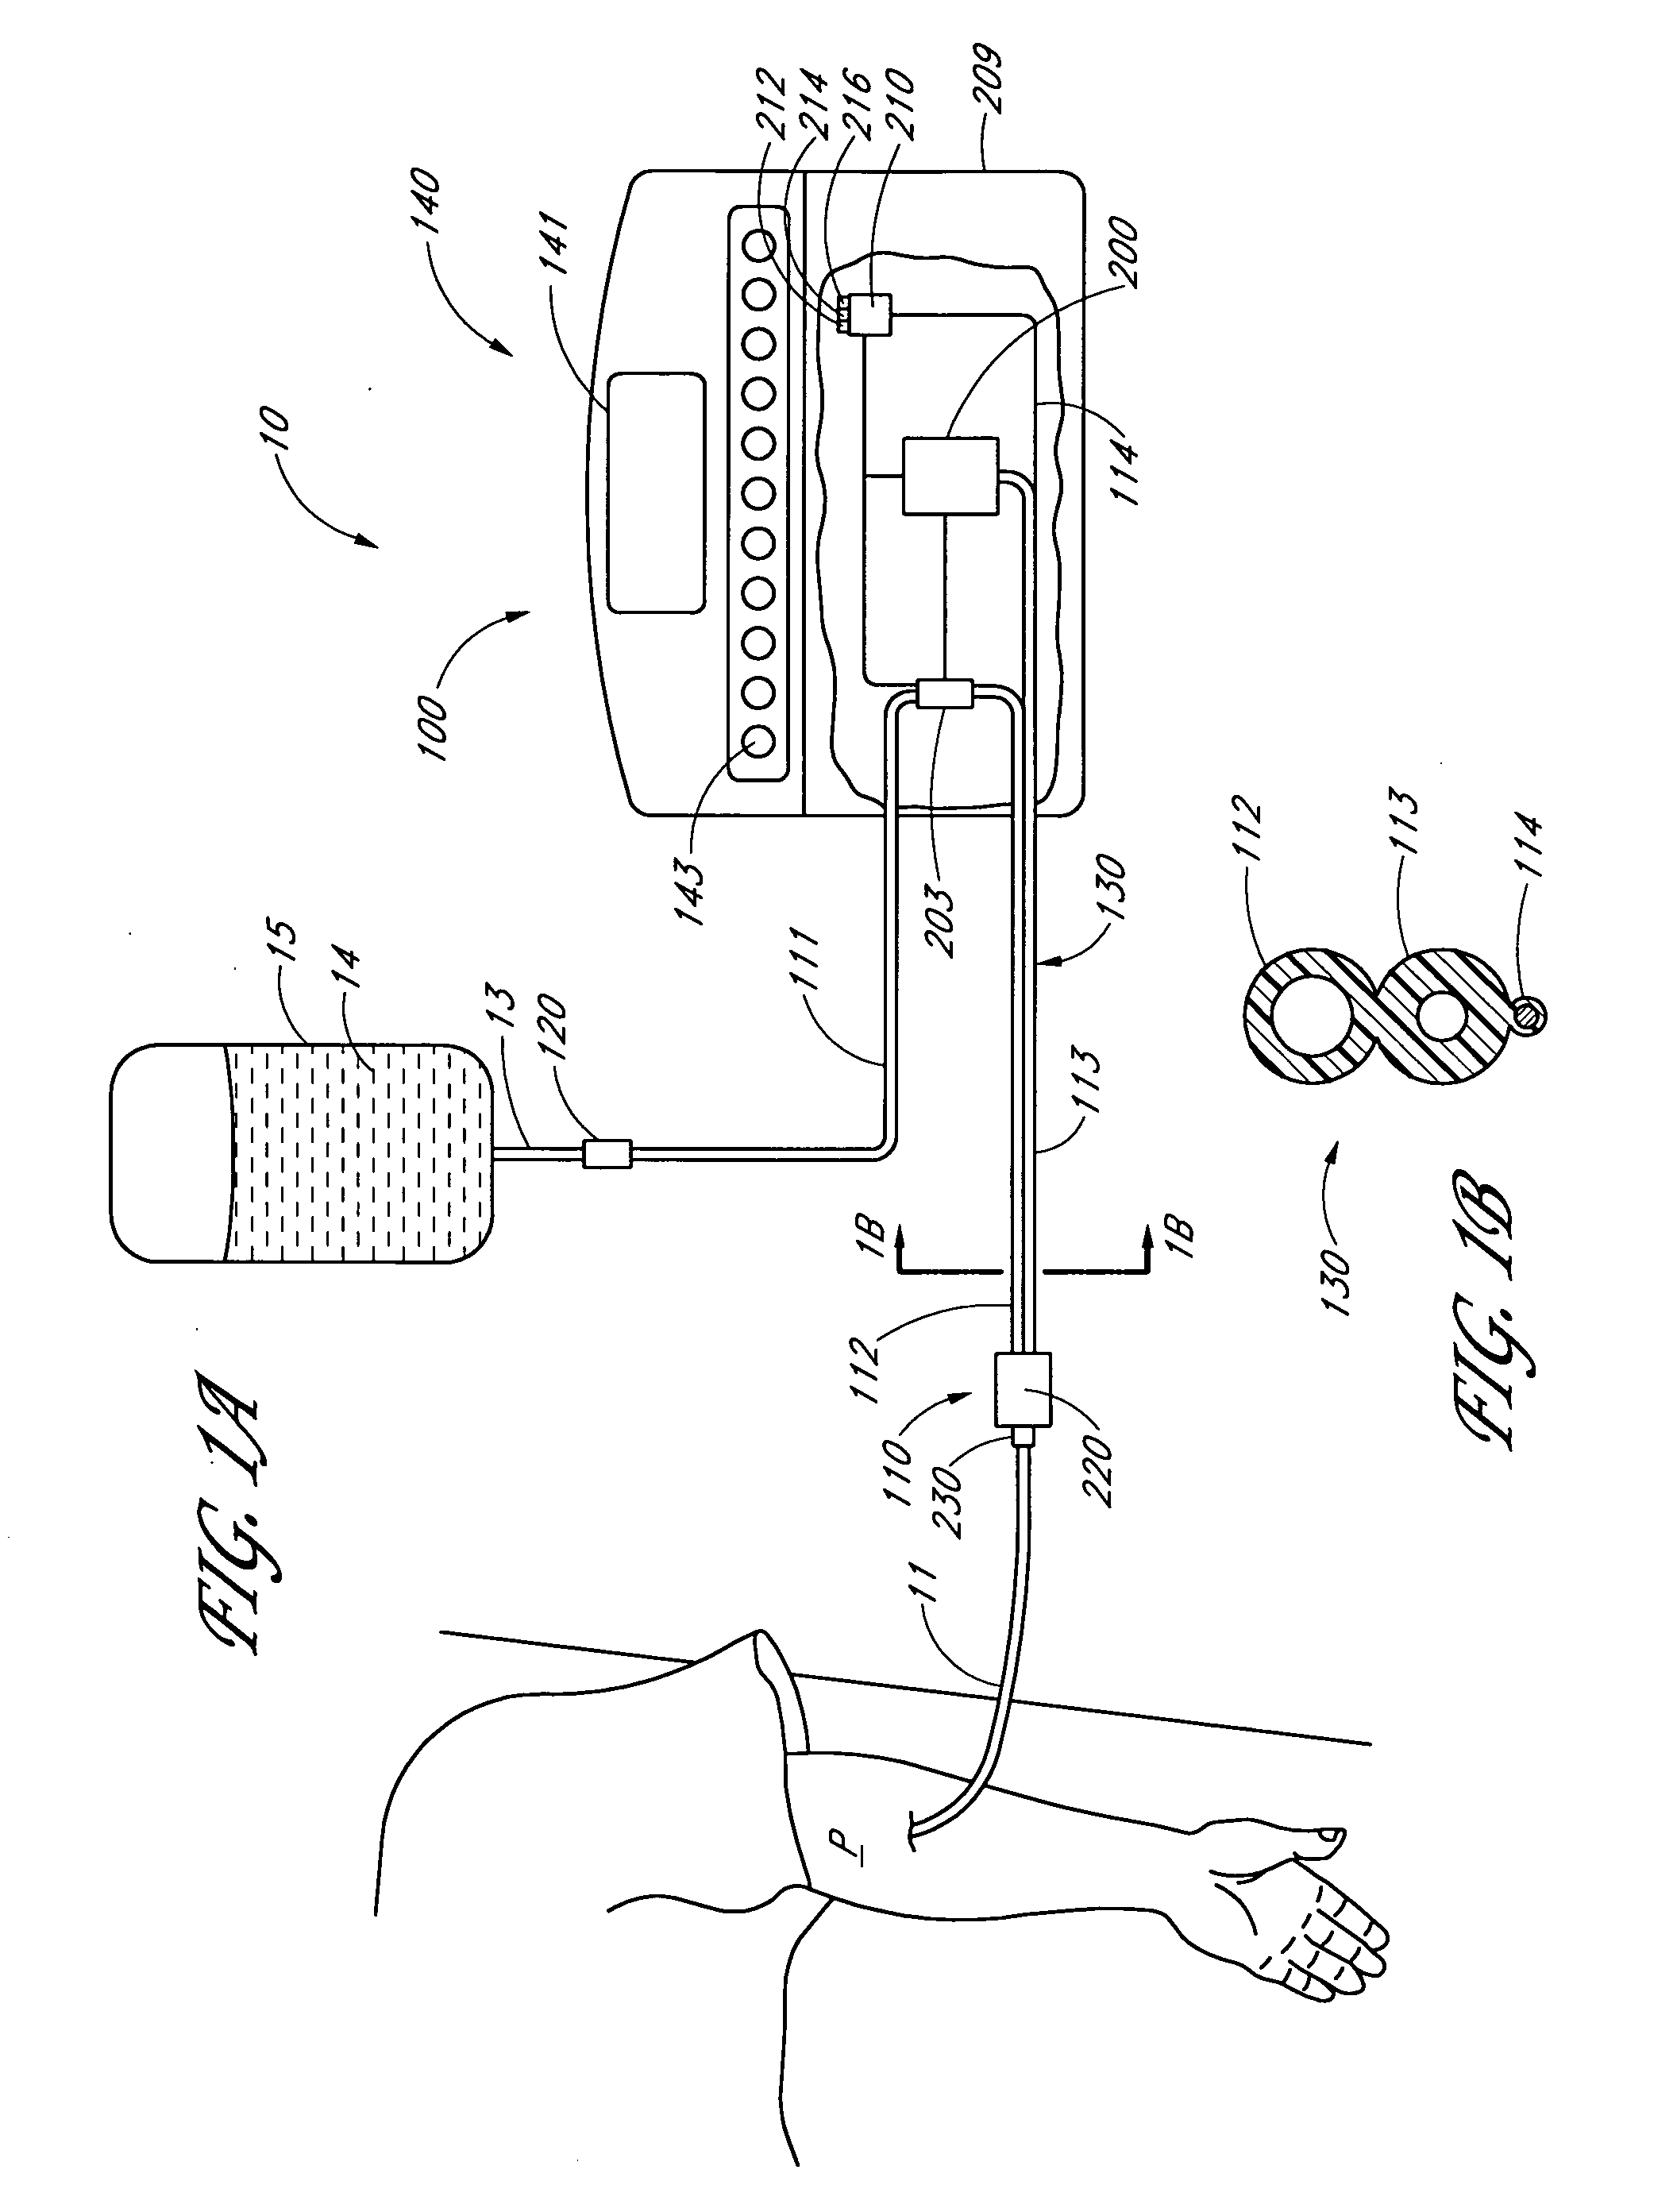 Analyte detection system with user interface providing trend display